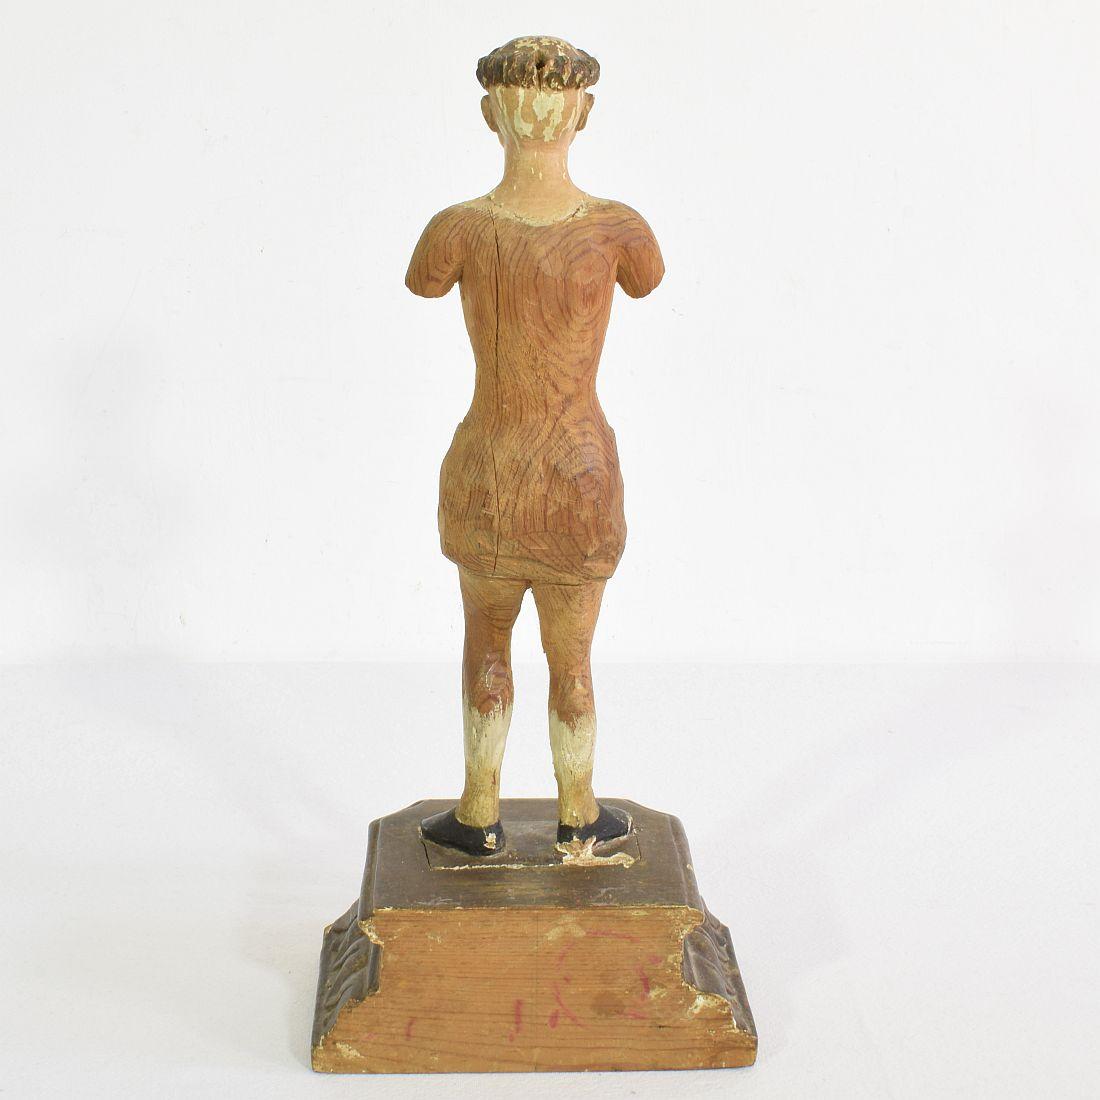 Italian 19th Century Carved Wooden Saint Figure In Good Condition For Sale In Buisson, FR